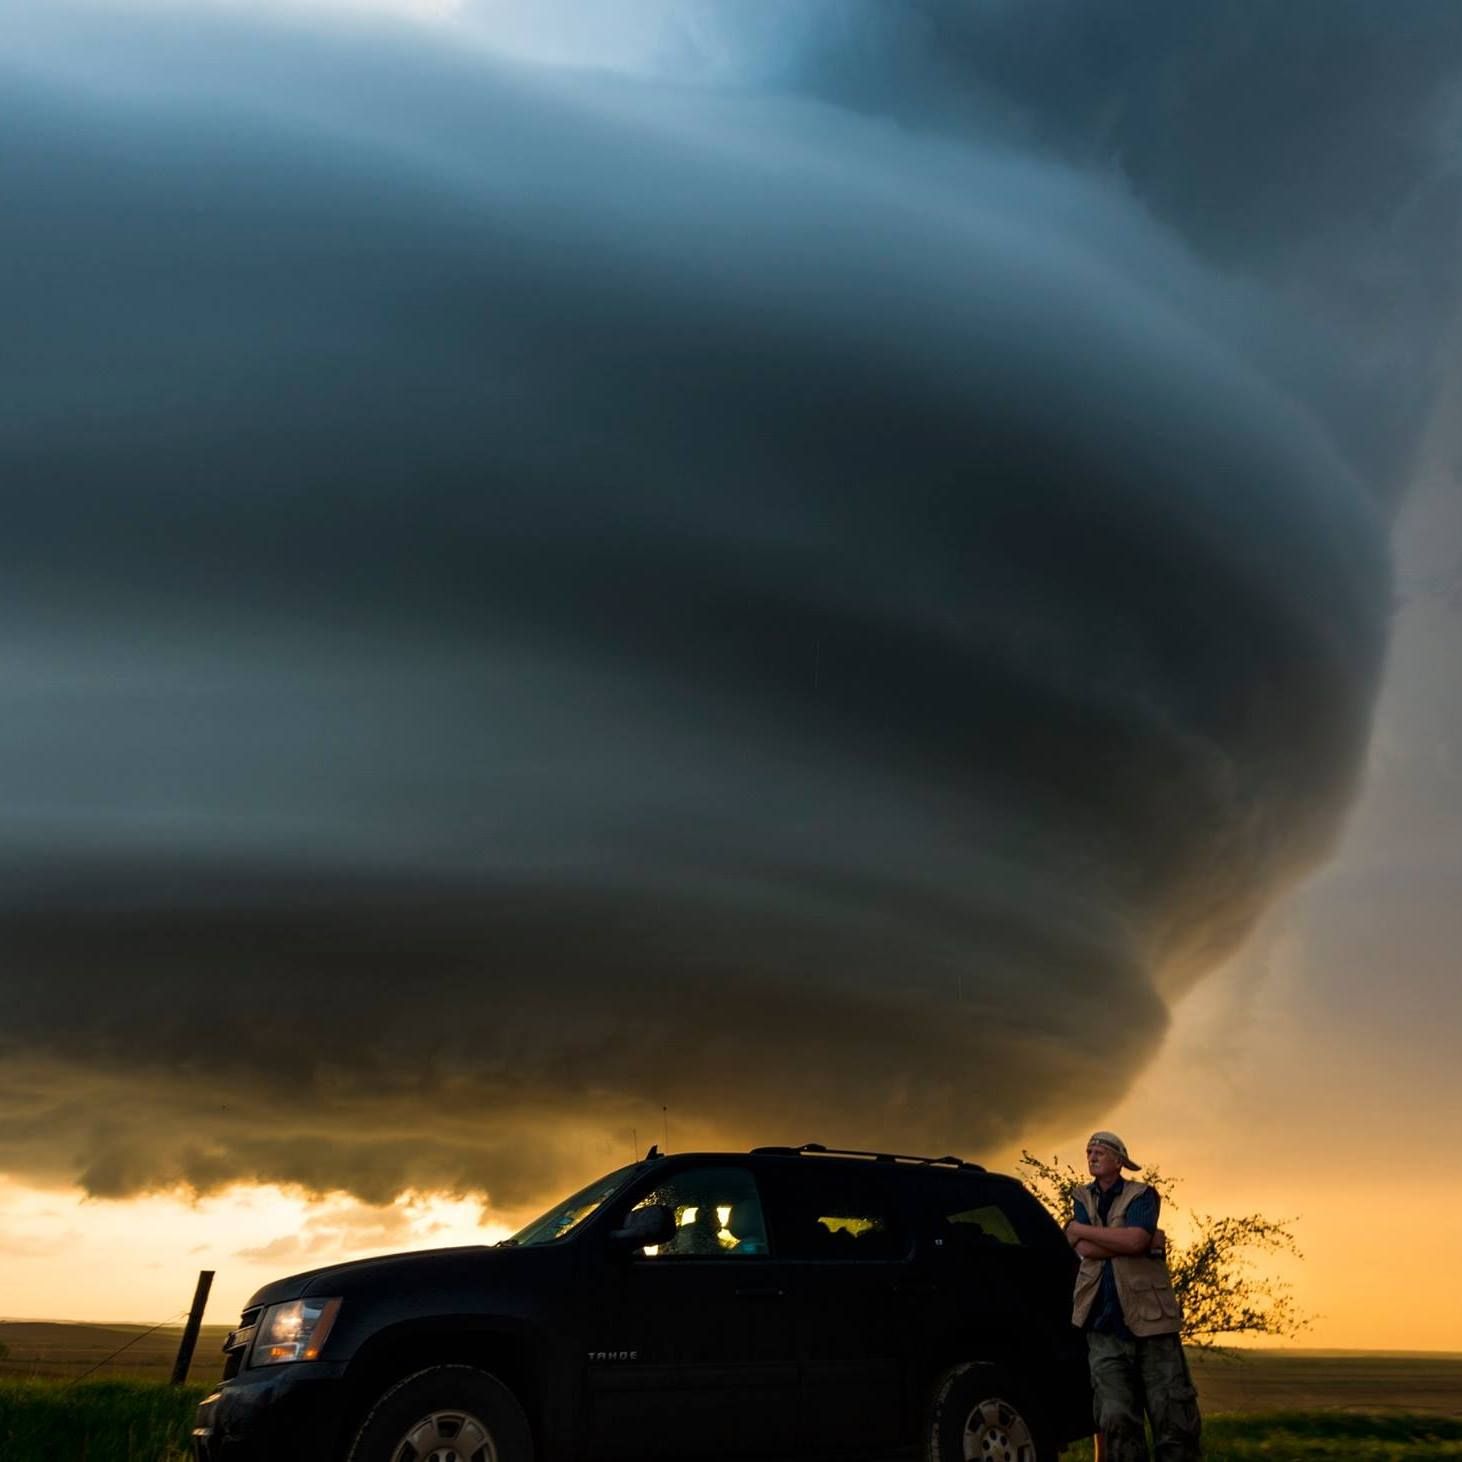 A man is standing next to a car in front of a large storm cloud